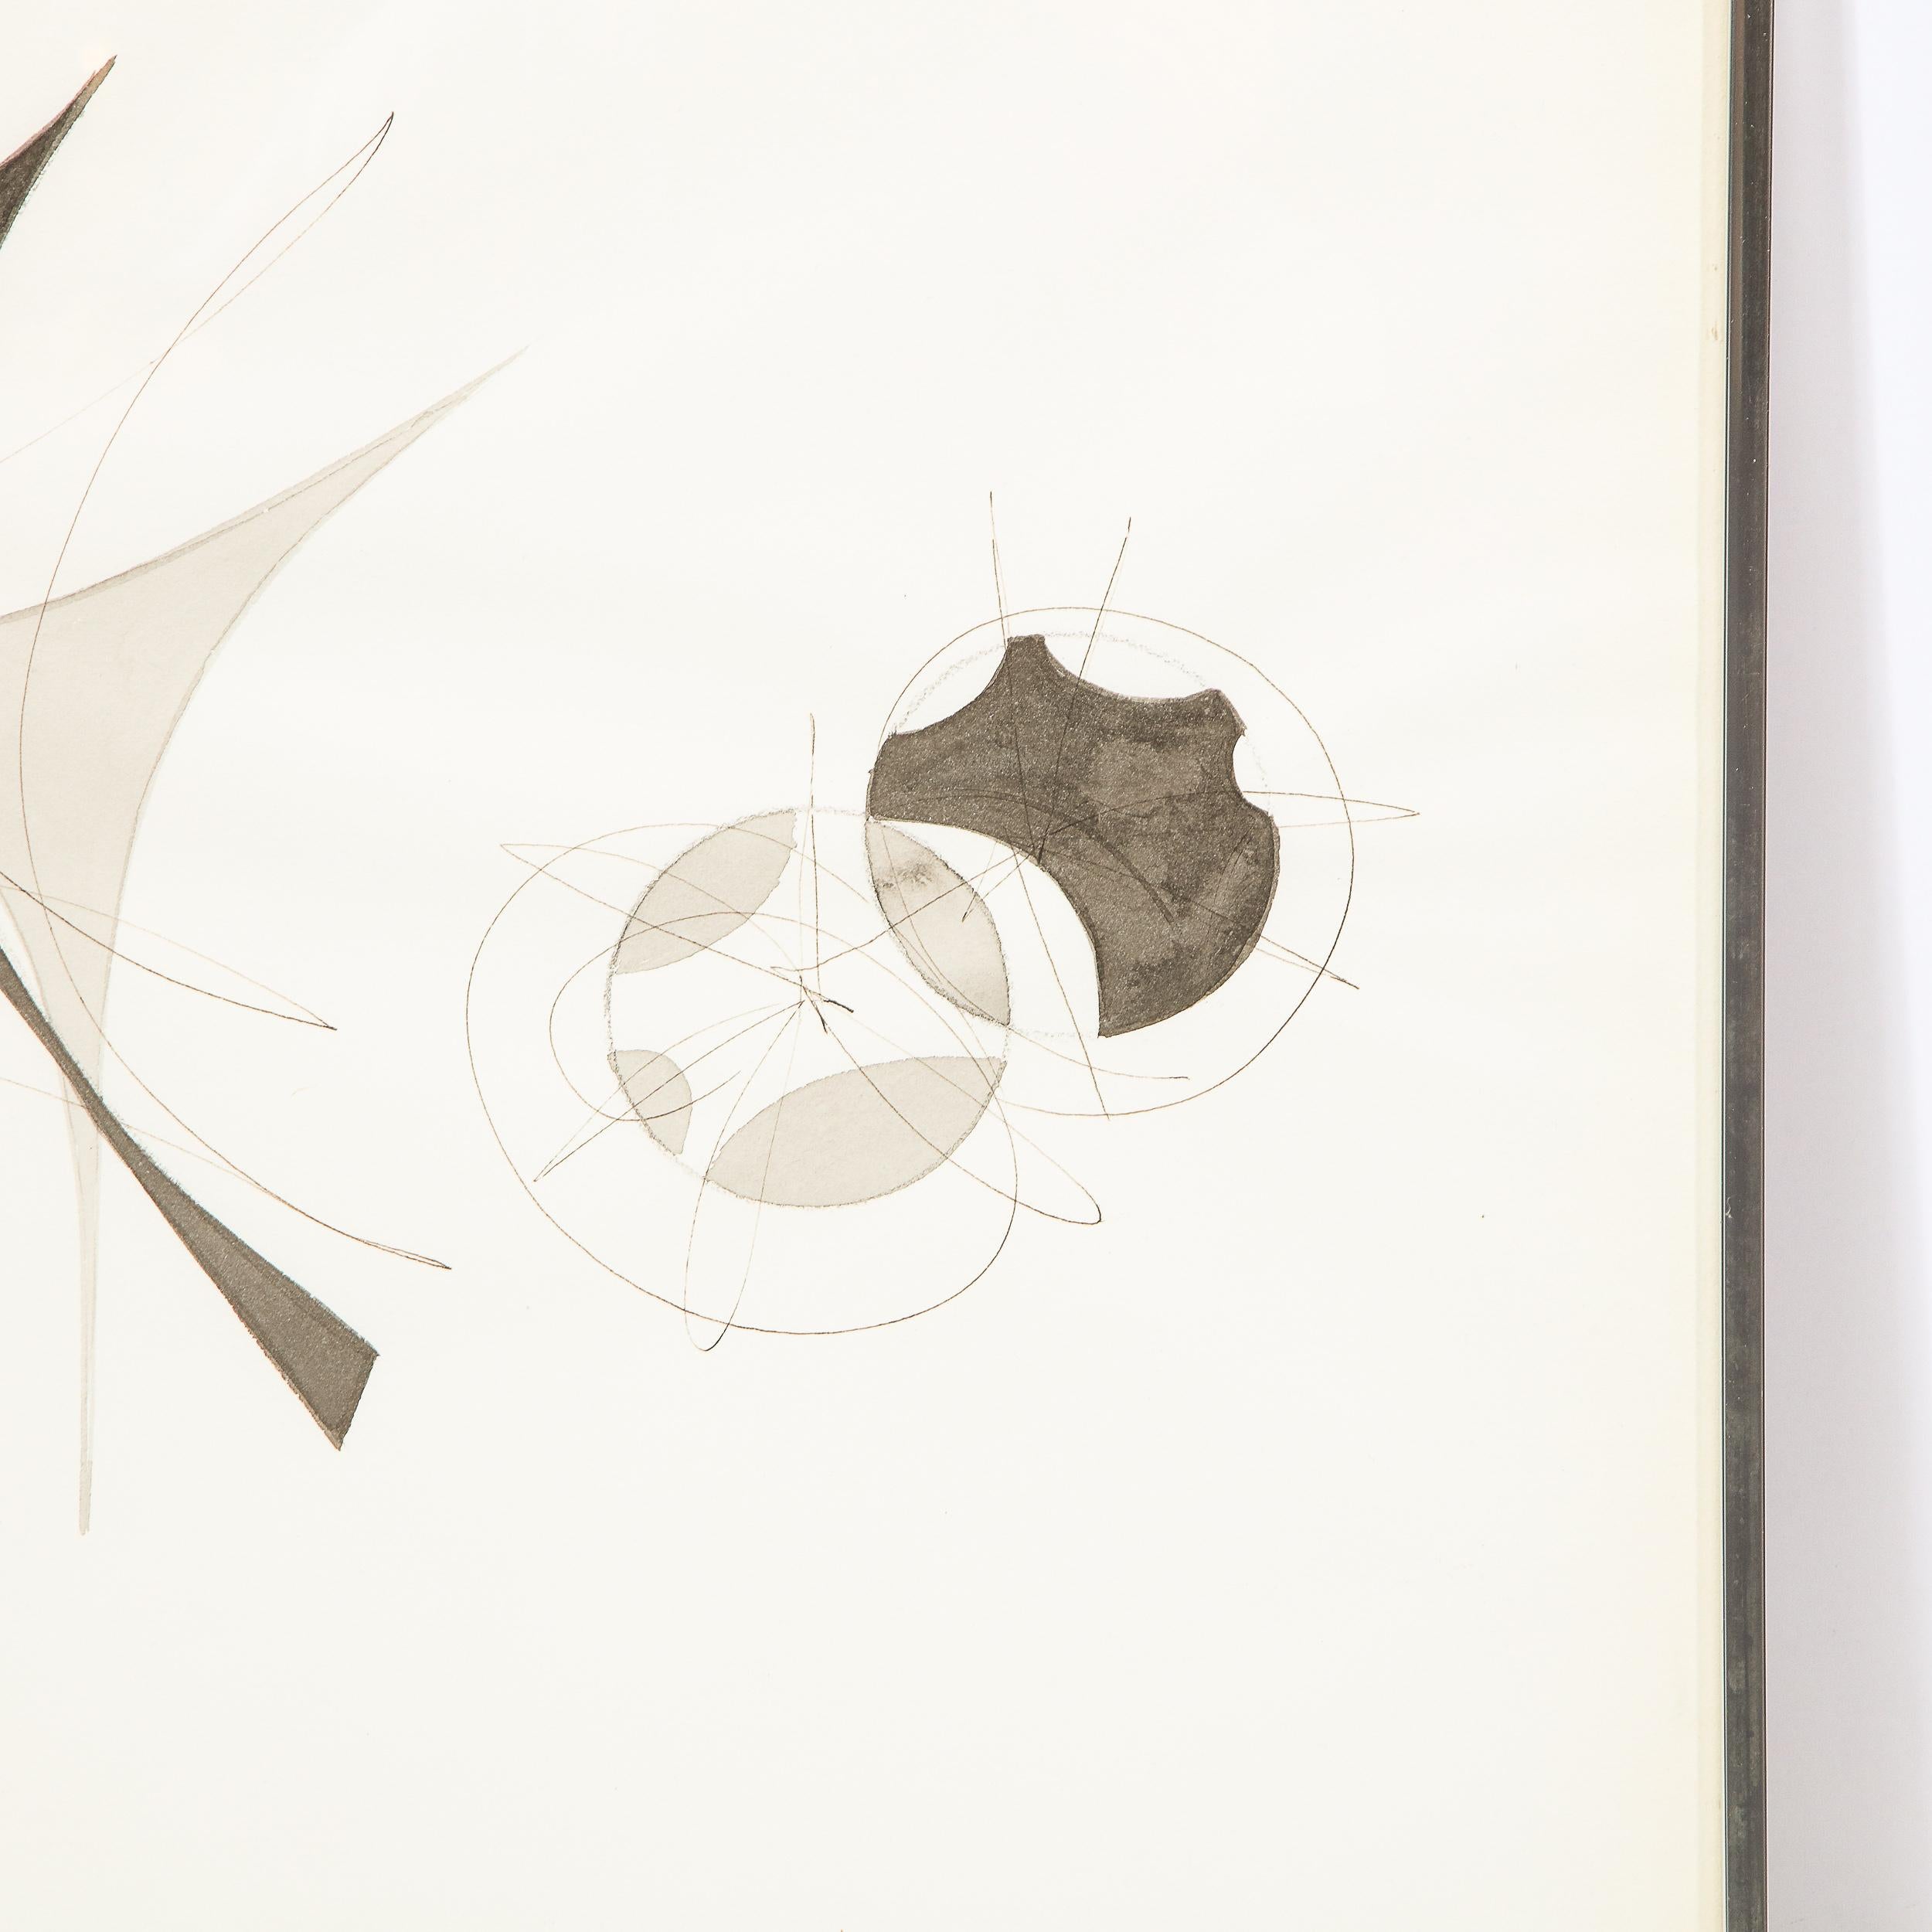 This elegant ink on paper work was realized by the esteemed 20th century American artist Sacha Kolin, circa 1970. The work features amorphic and atomic forms with curvilinear expressionistic detailing in grisaille tones against a white background.